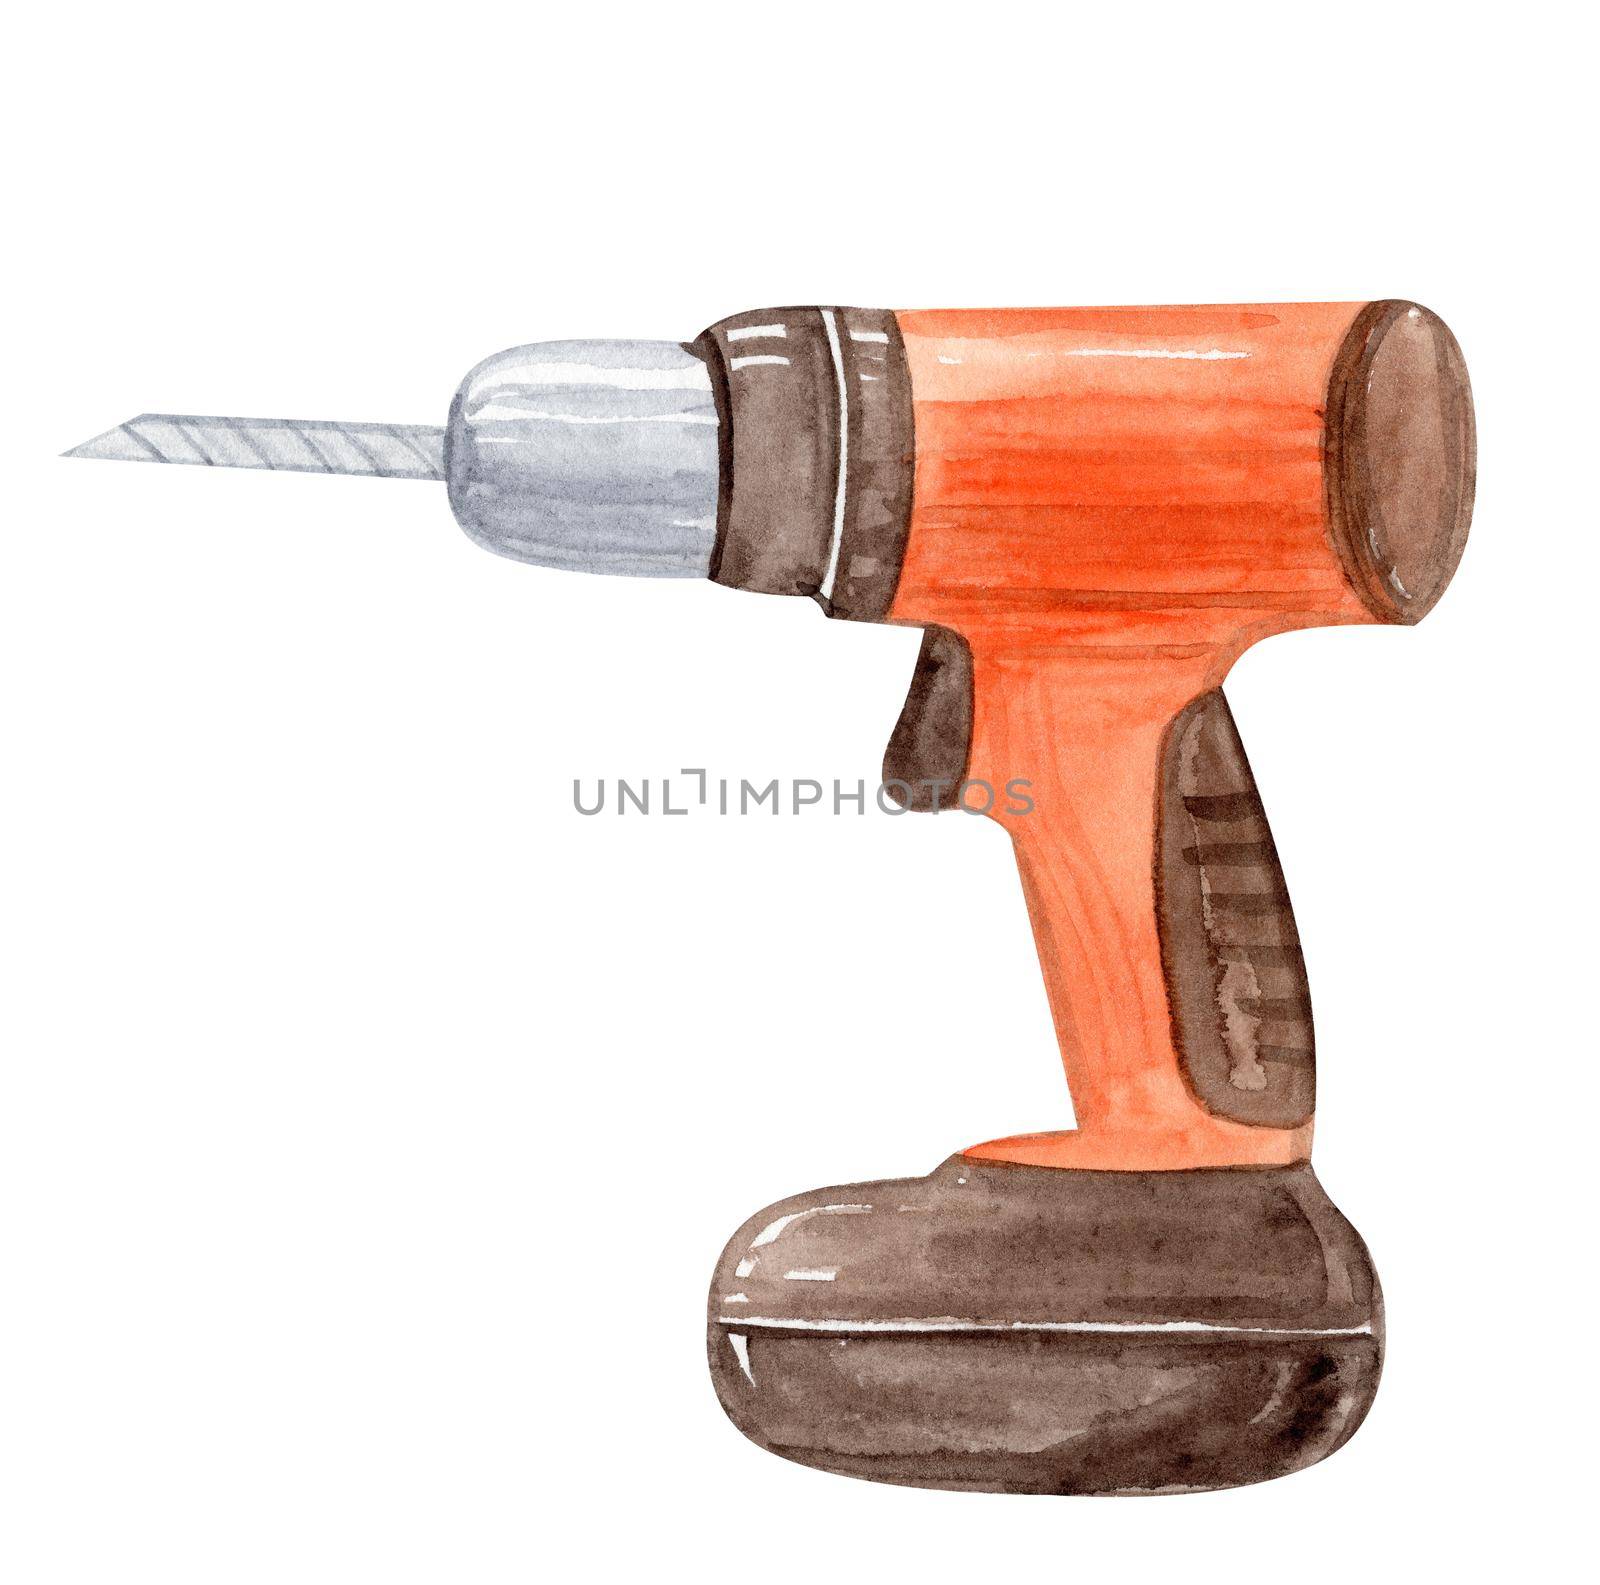 Watercolor orange drill tool isolated on white background. Hand drawn instrument illustration